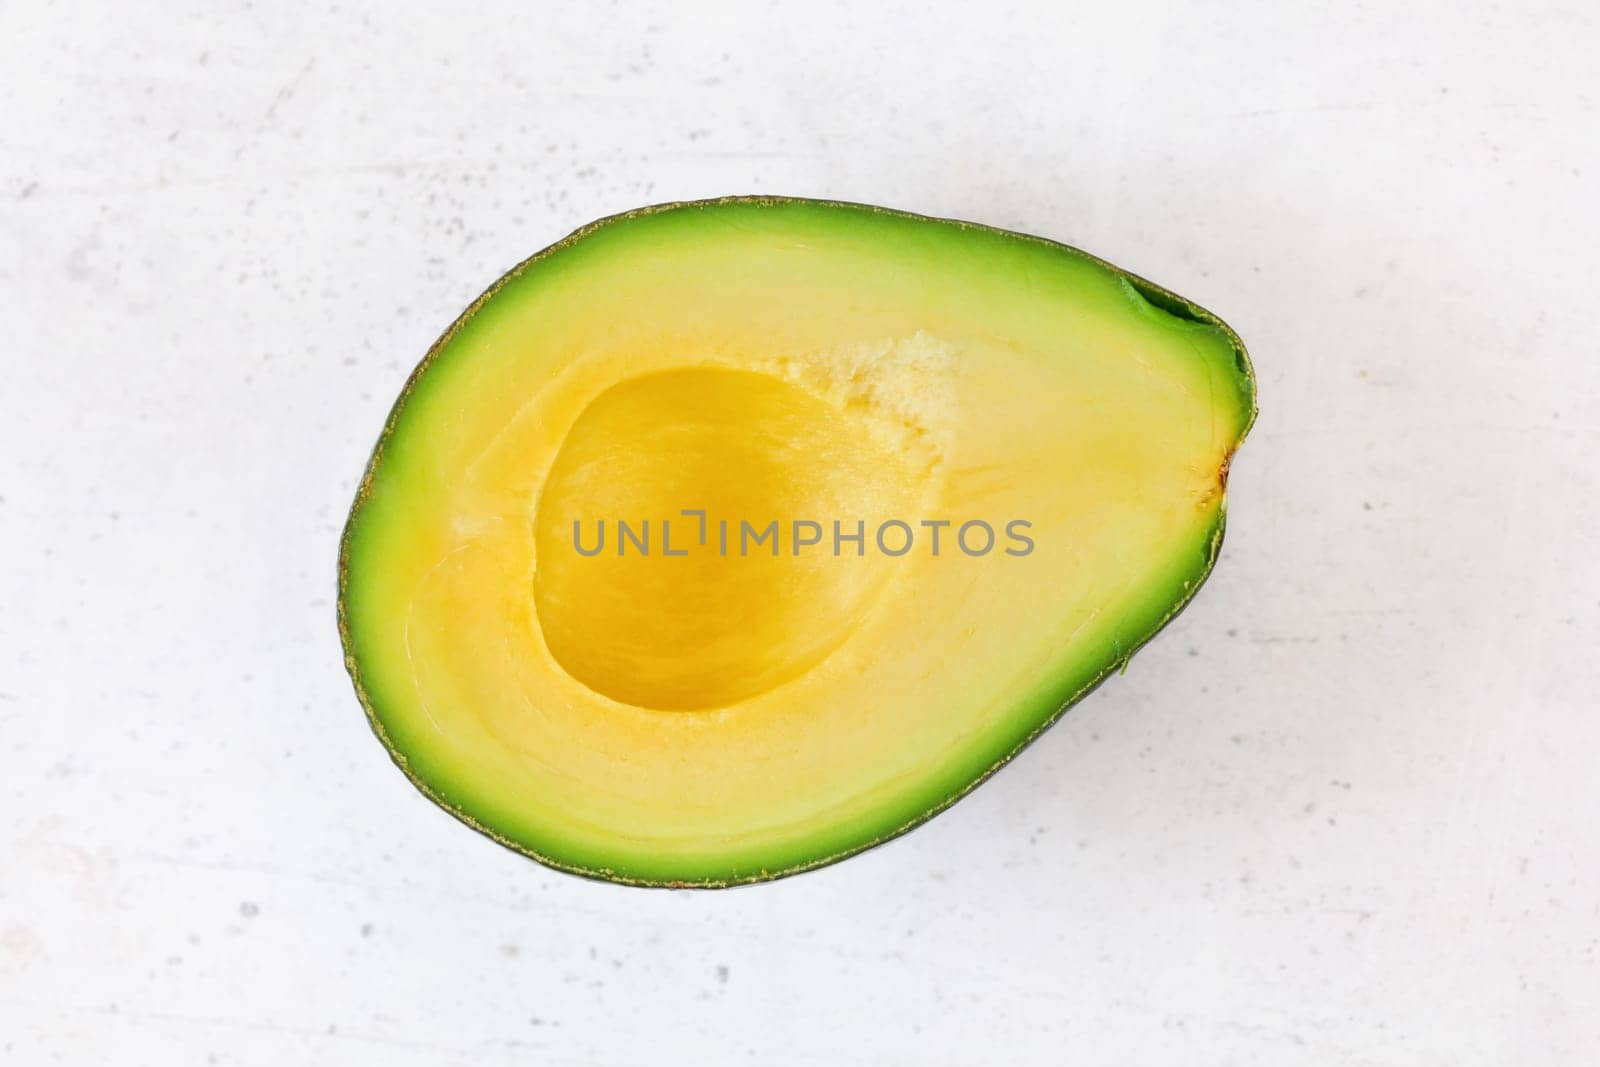 Top down view, halved avocado with yellow fruit pulp on white stone board by Ivanko